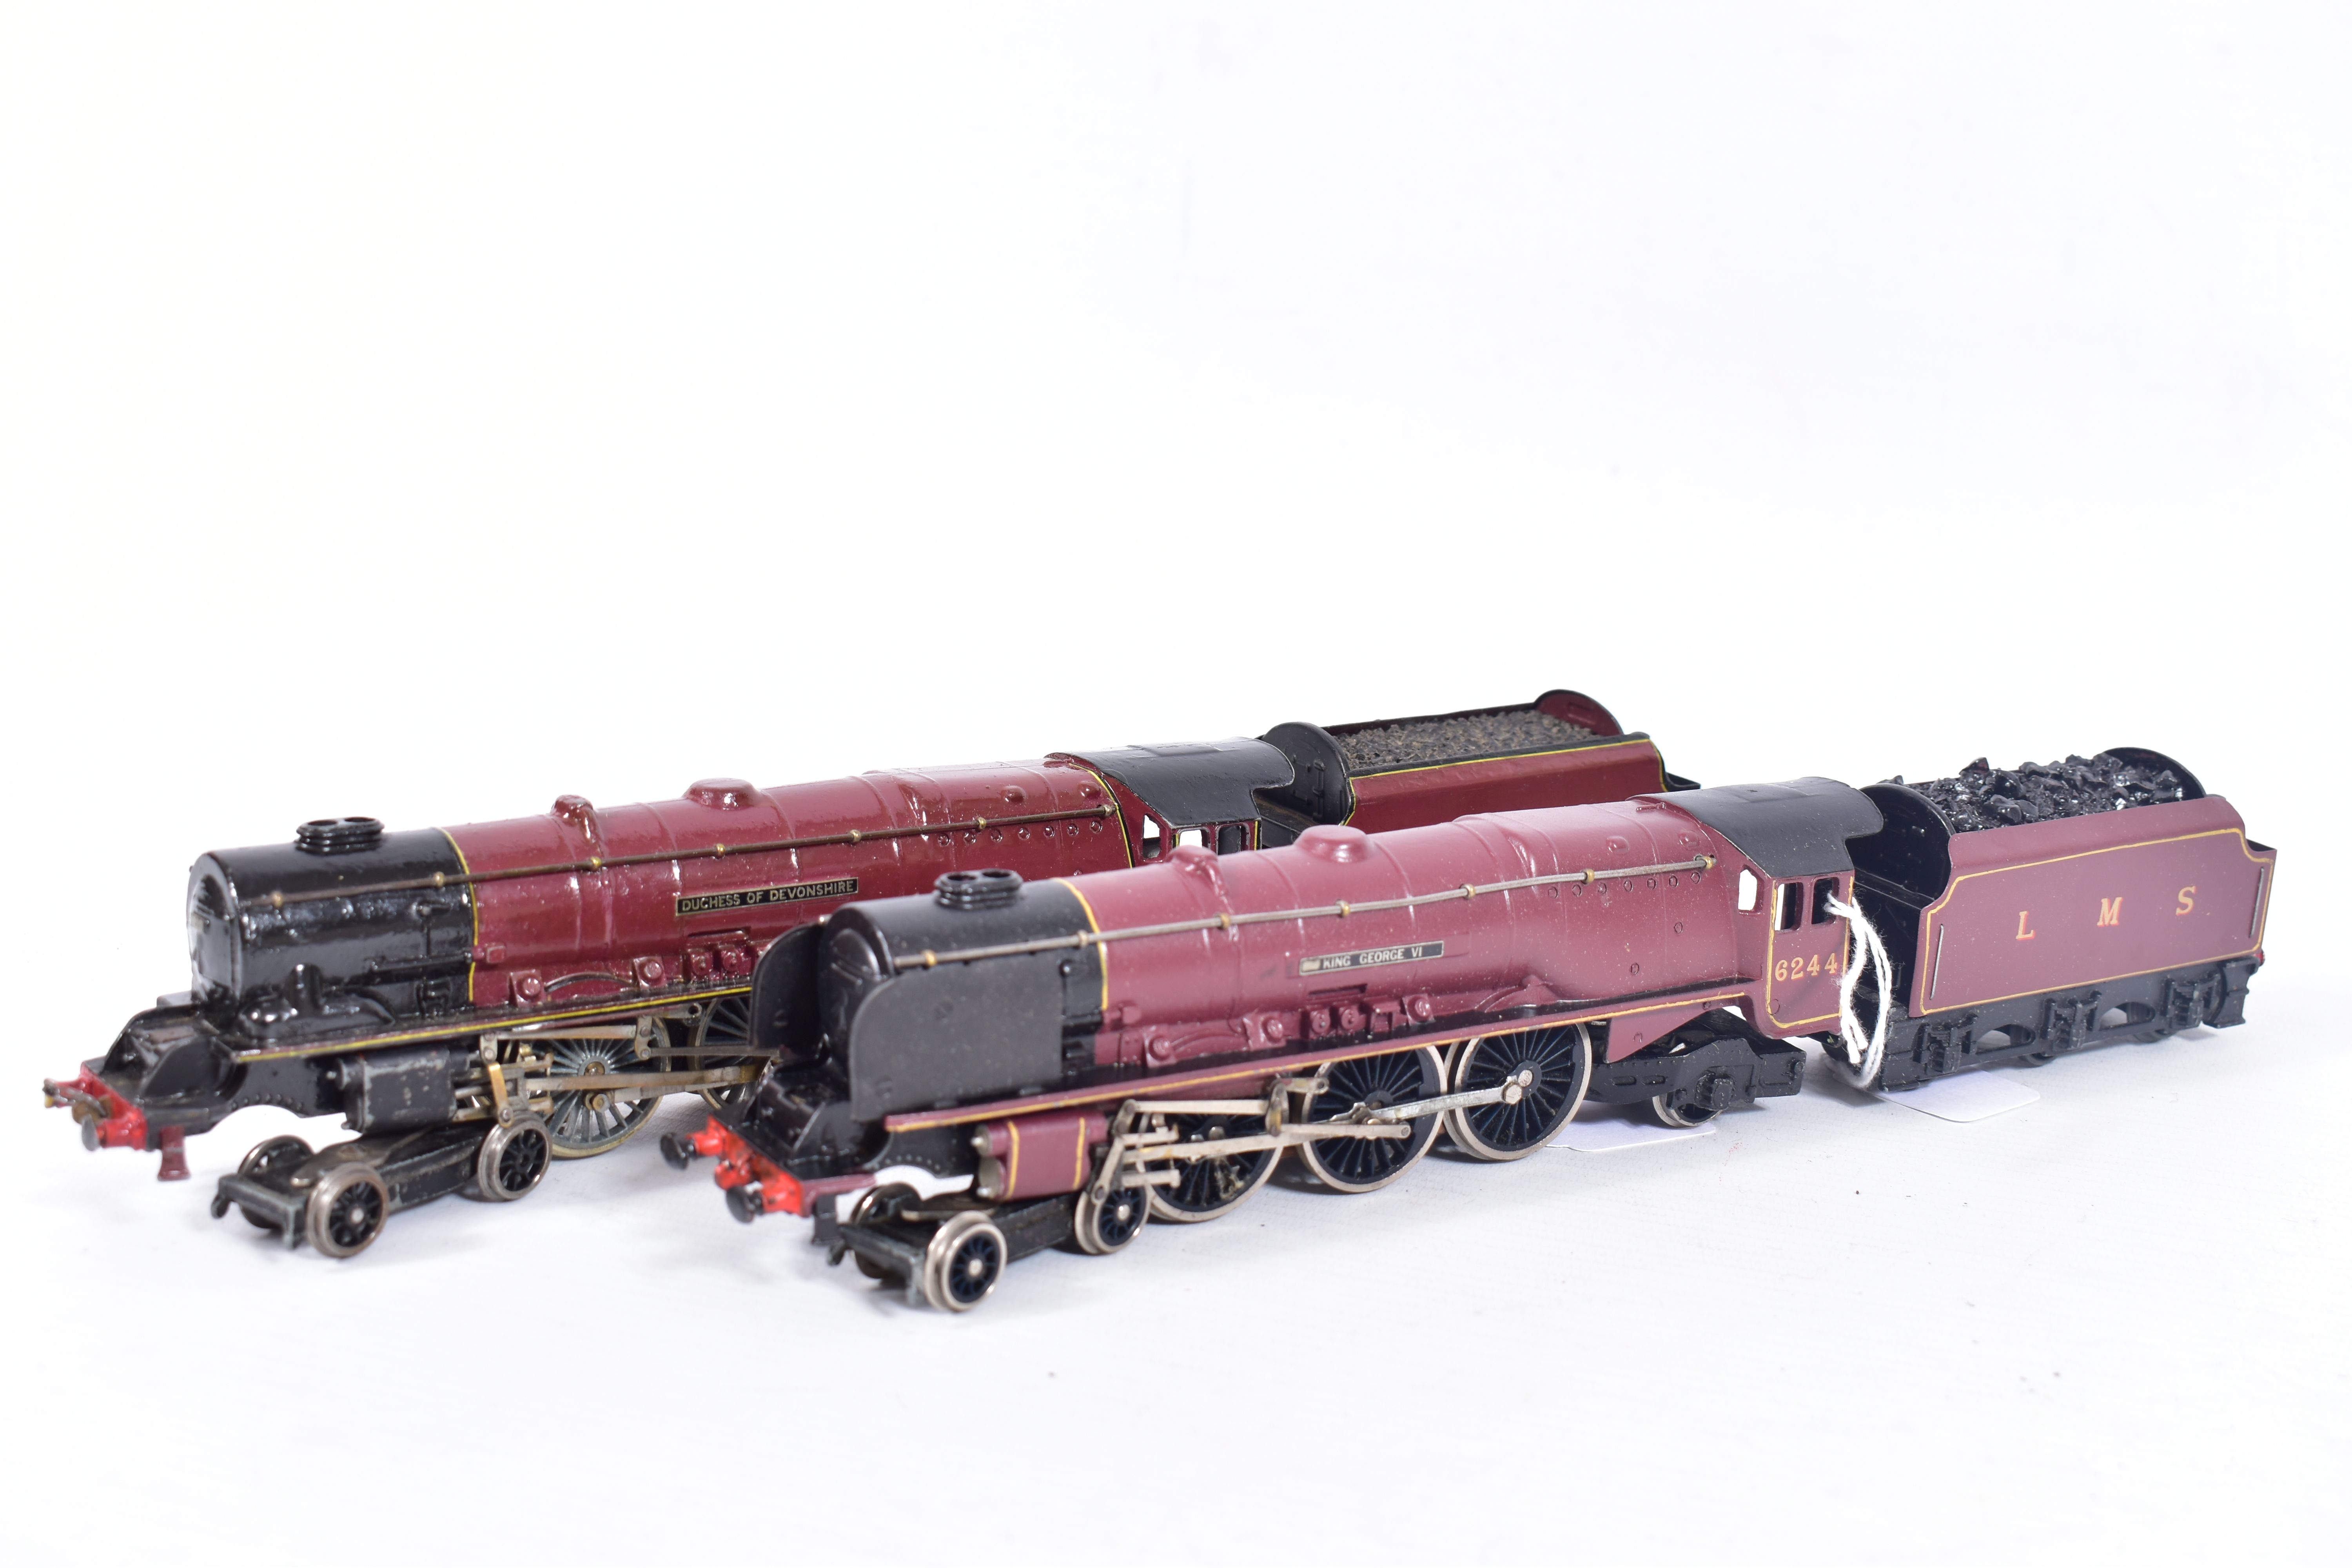 TWO BOXED HORNBY DUBLO DUCHESS CLASS LOCOMOTIVES, both have been repainted, renumbered and renamed